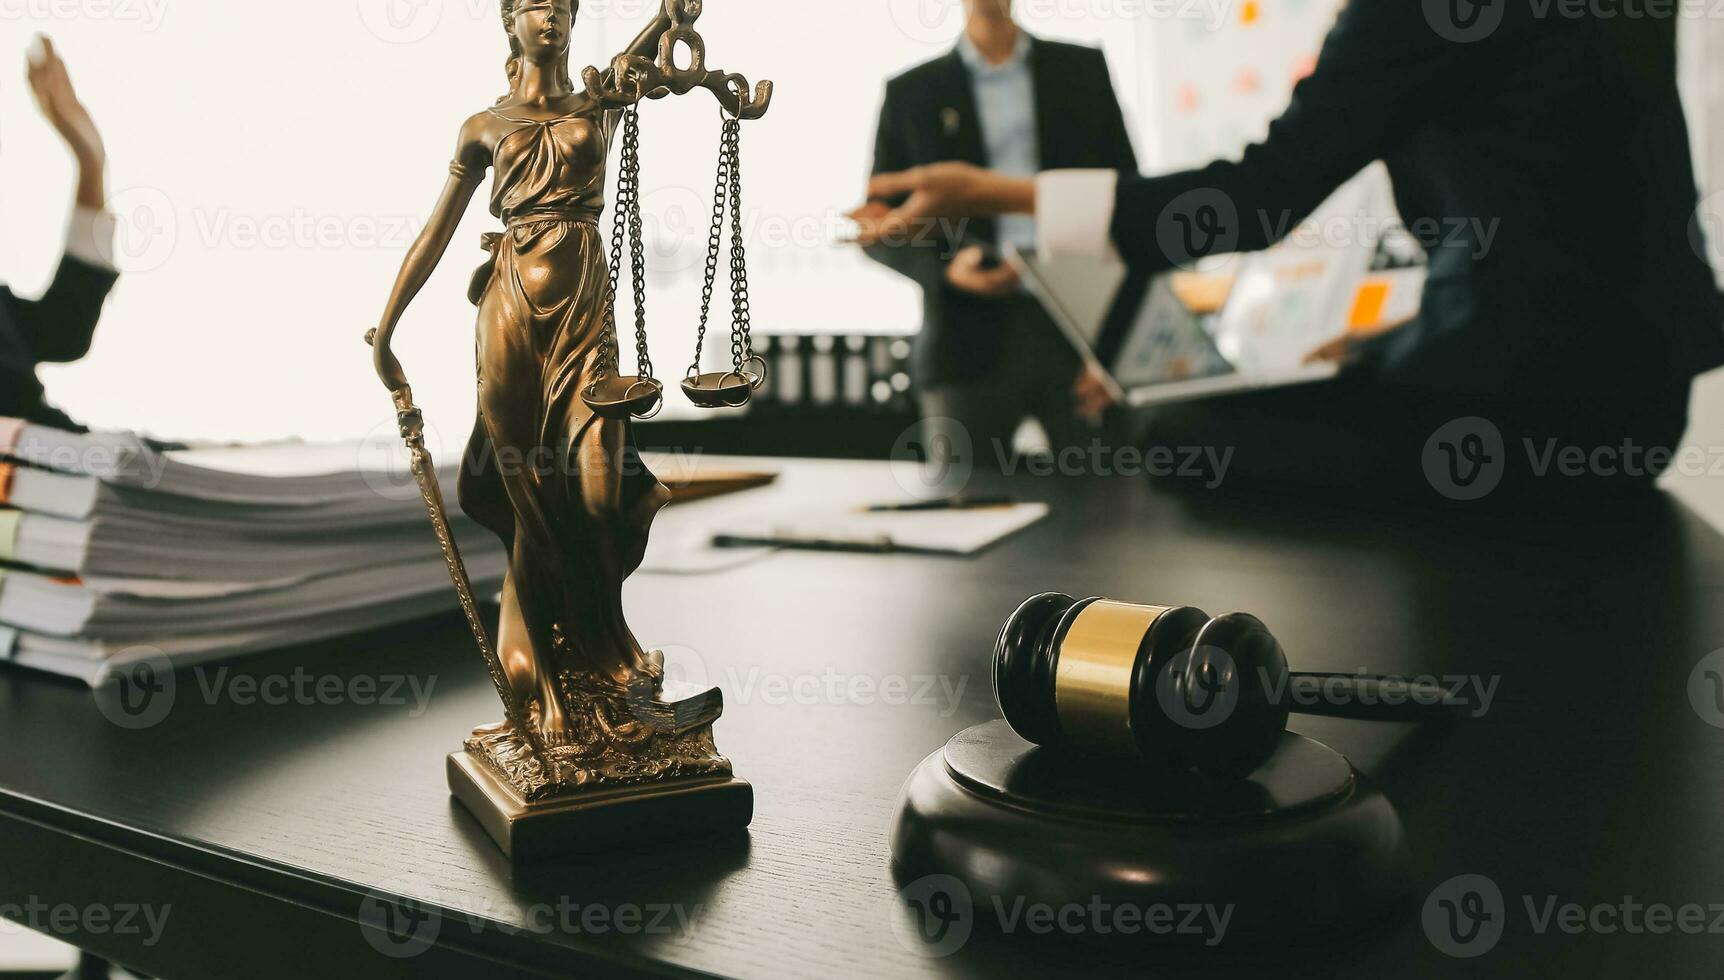 Consultation and conference of Male lawyers and professional businesswoman working and discussion having at law firm in office. Concepts of law, Judge gavel with scales of justice. photo